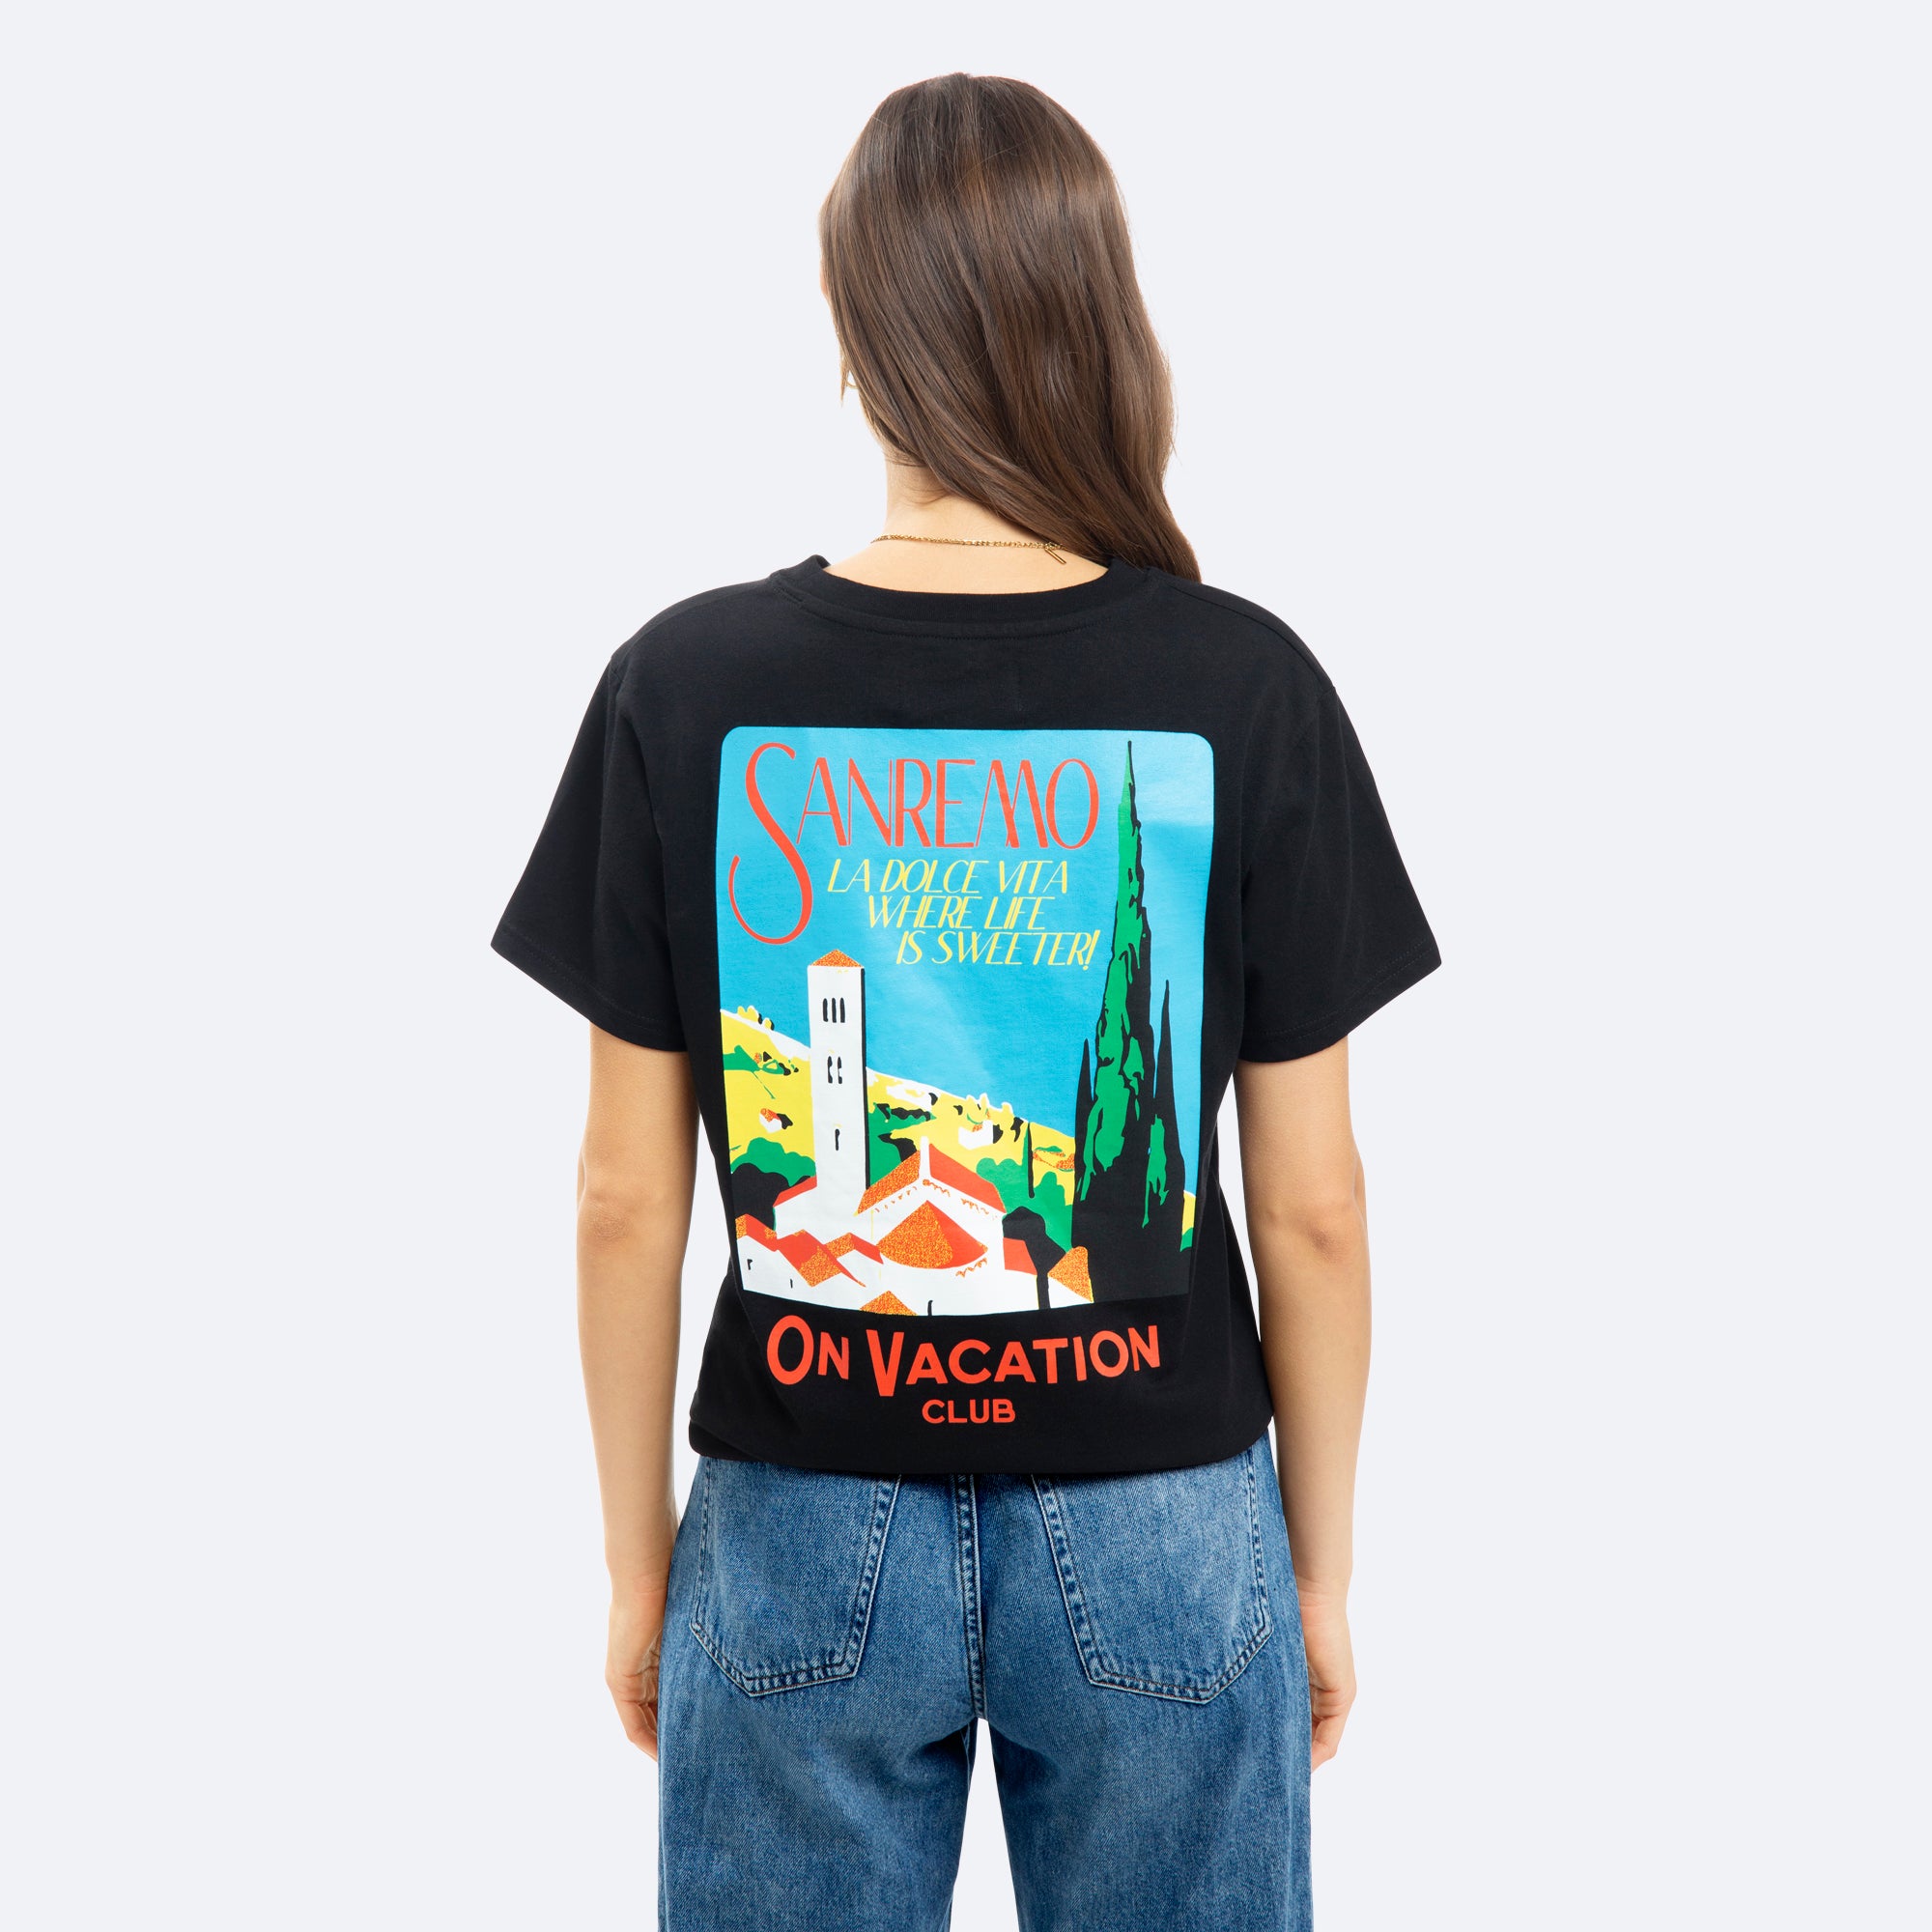 On Vacation Unisex T-Shirt "Let's Grow Together" - Light Blue